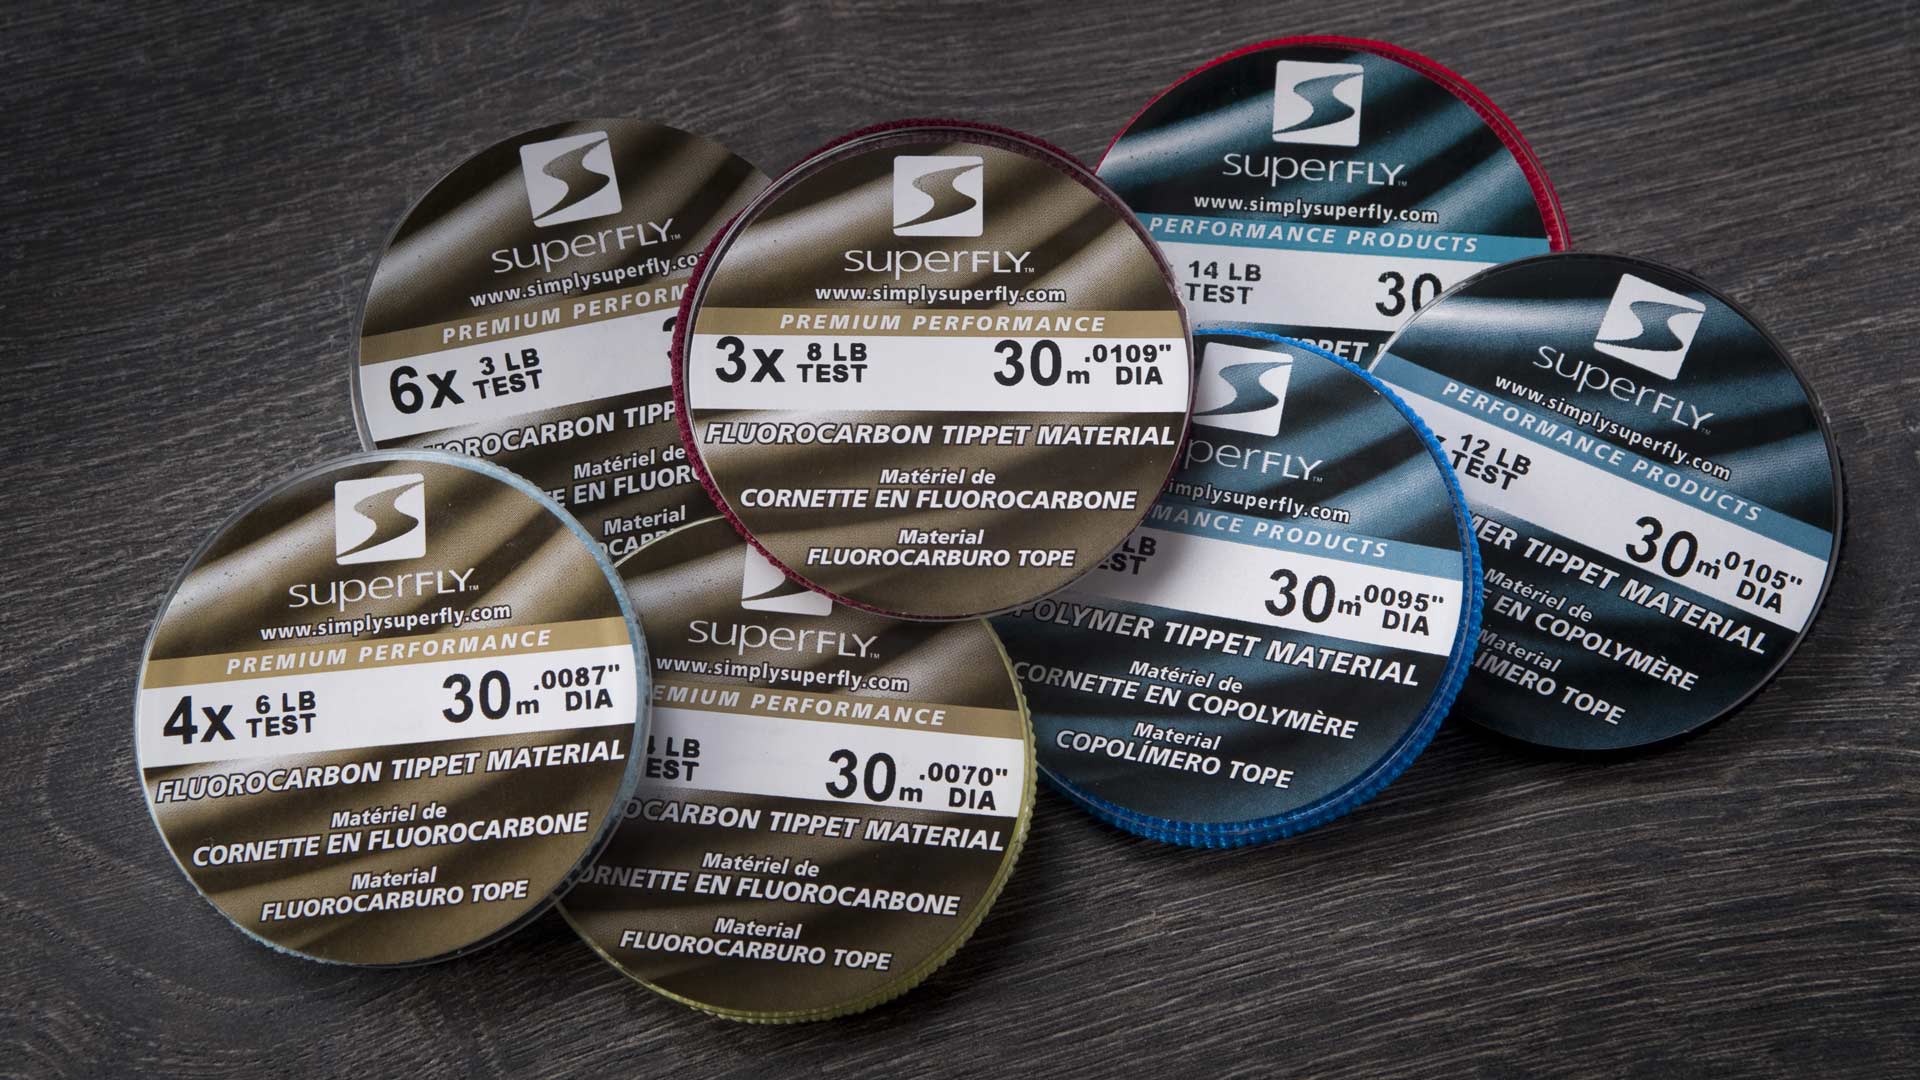 https://www.simplysuperfly.com/wp-content/uploads/2014/06/xl-superfly-0063-detail-tippet-fly-fishing.jpg